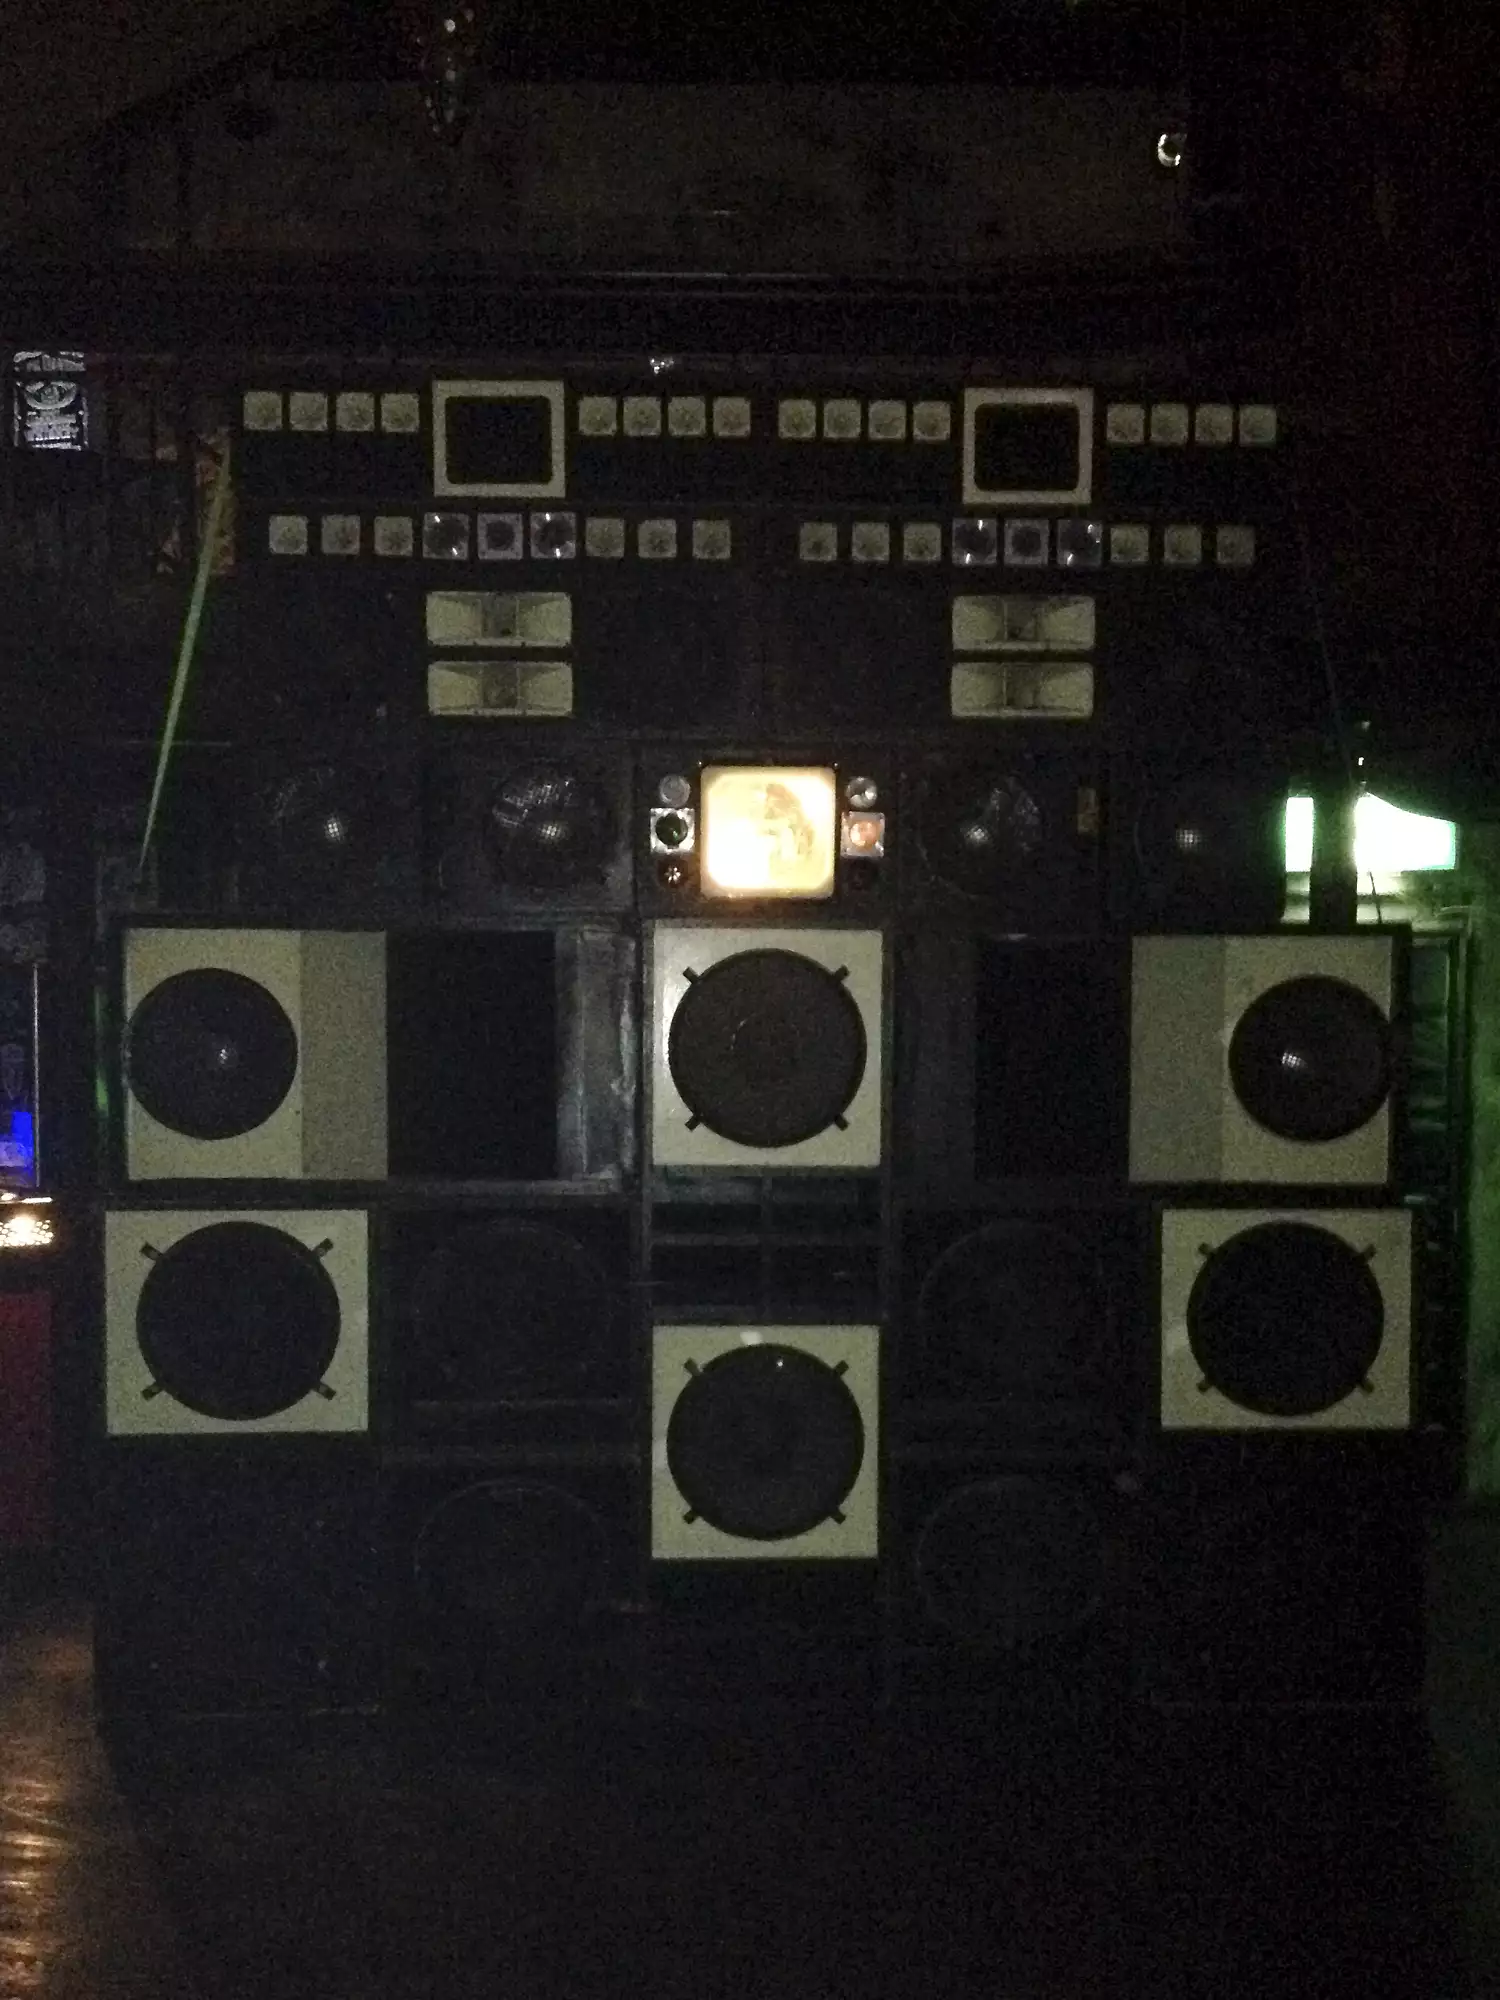 A picture of a huge sound system.Black and whit speaker boxes built up way higher than human. Inthe center there is a mirror ball inside the Speaker.